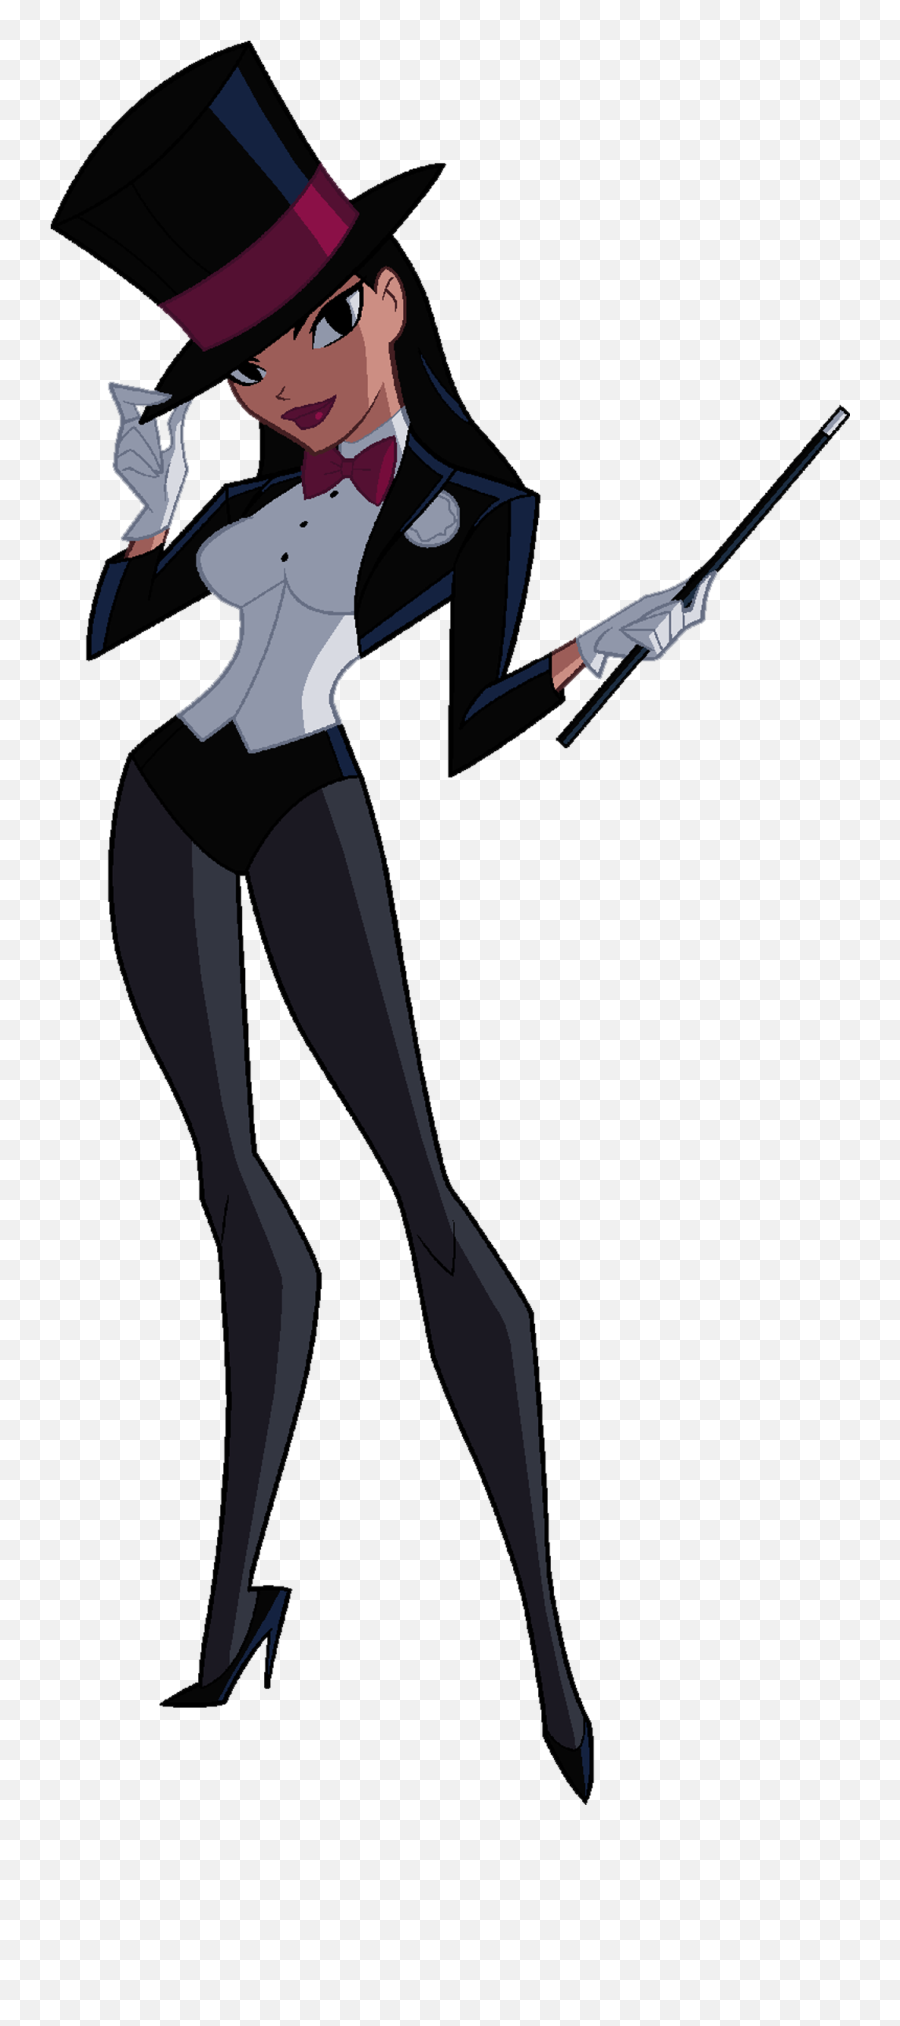 Download Teen Titans Go Zatanna - Full Size Png Image Pngkit Draw The Justice League Action Cartoon Emoji,Teen Titans Go Logo